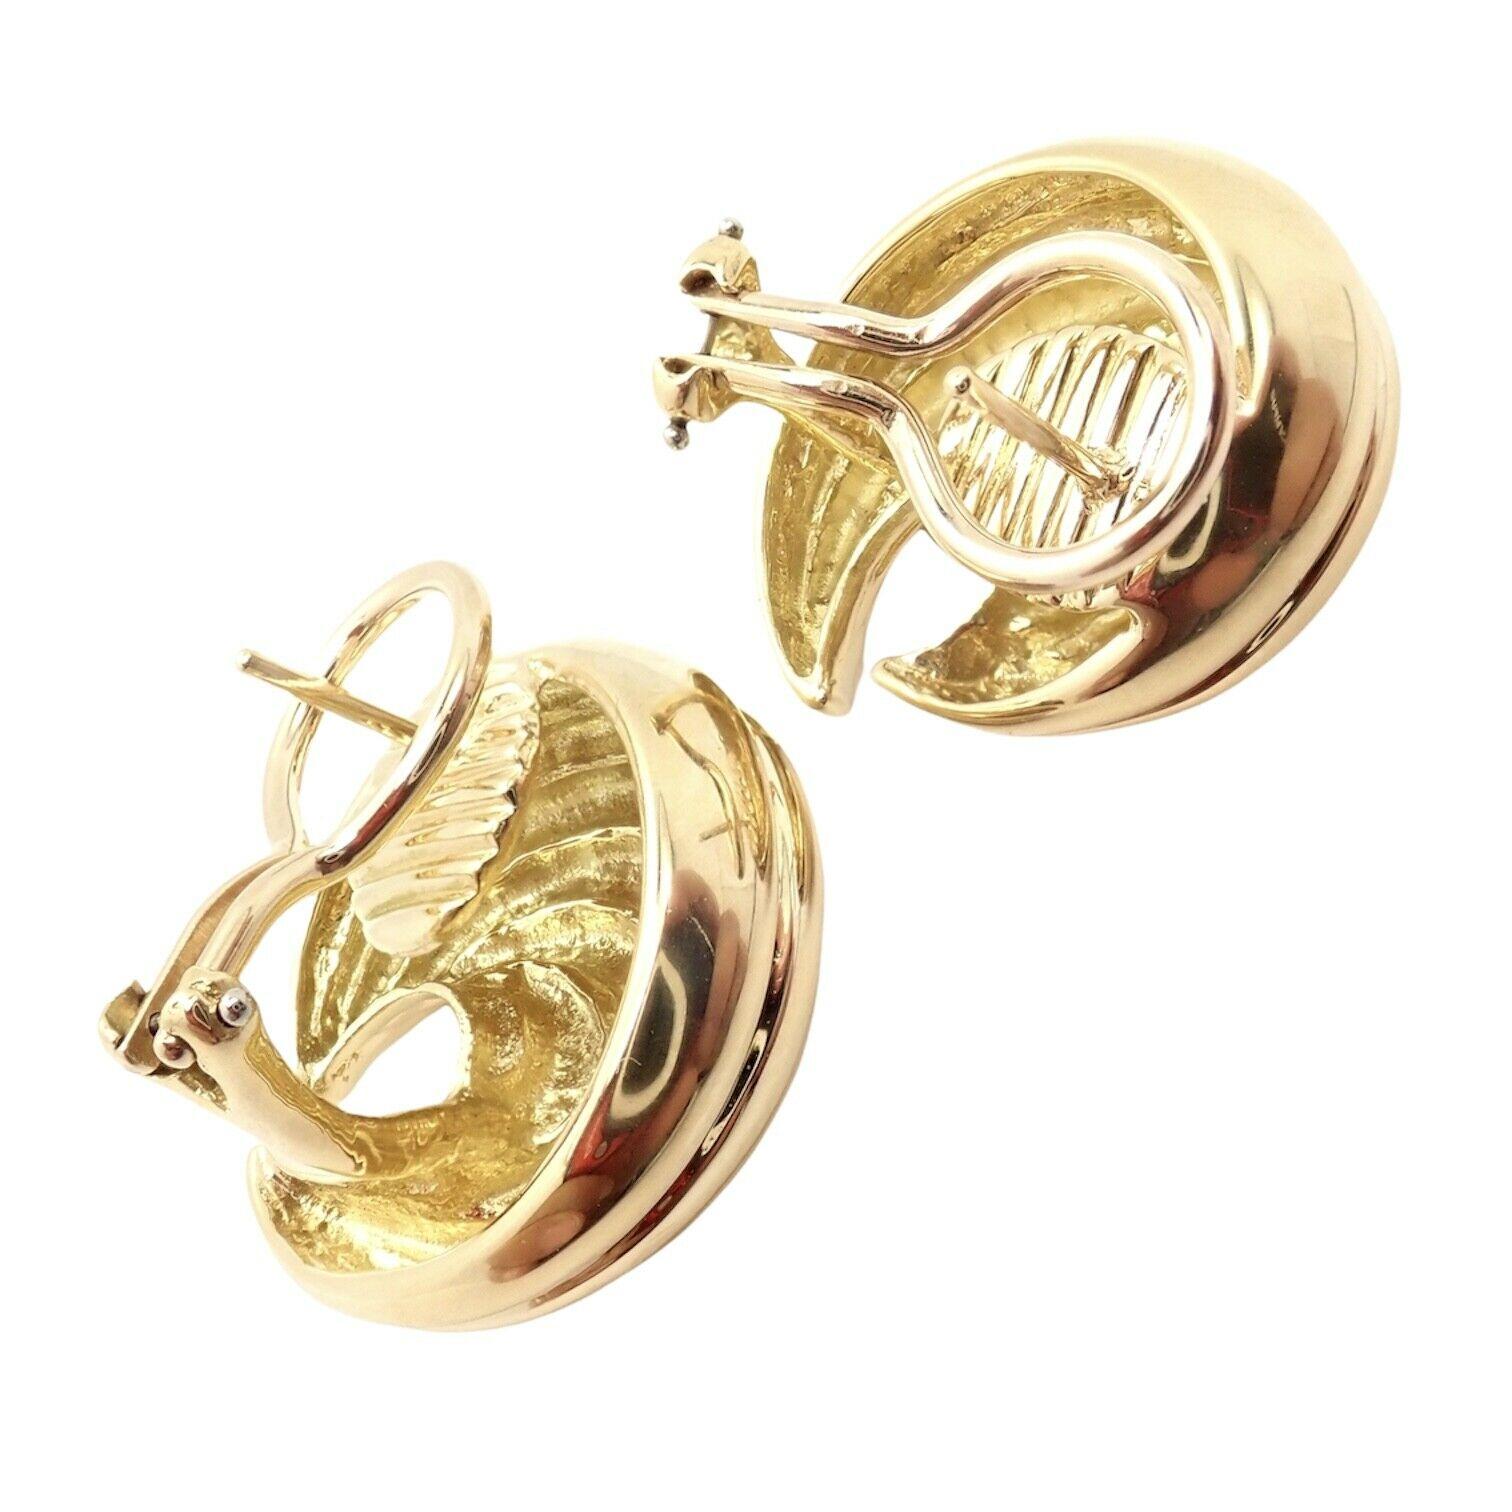 Vintage Tiffany & Co Crescent Moon Yellow Gold Earrings In Excellent Condition For Sale In Holland, PA